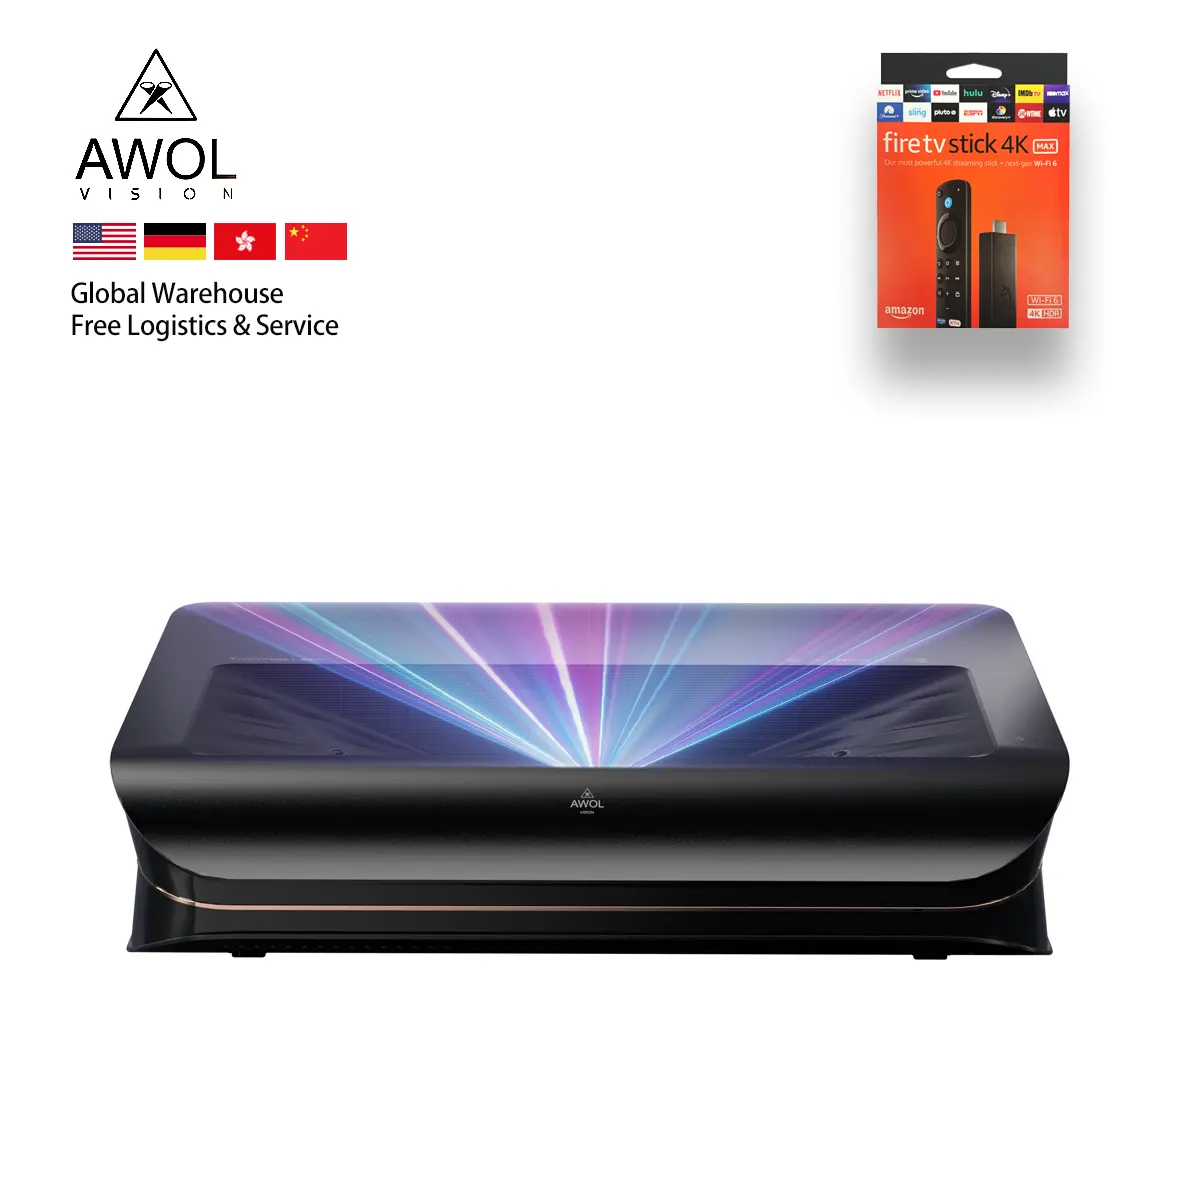 AWOL VISION LTV 3500 Smart TV Mini Projeteur Full HD Home Theater Cinema 3500 ANSI Lumens Android 4K Projectors